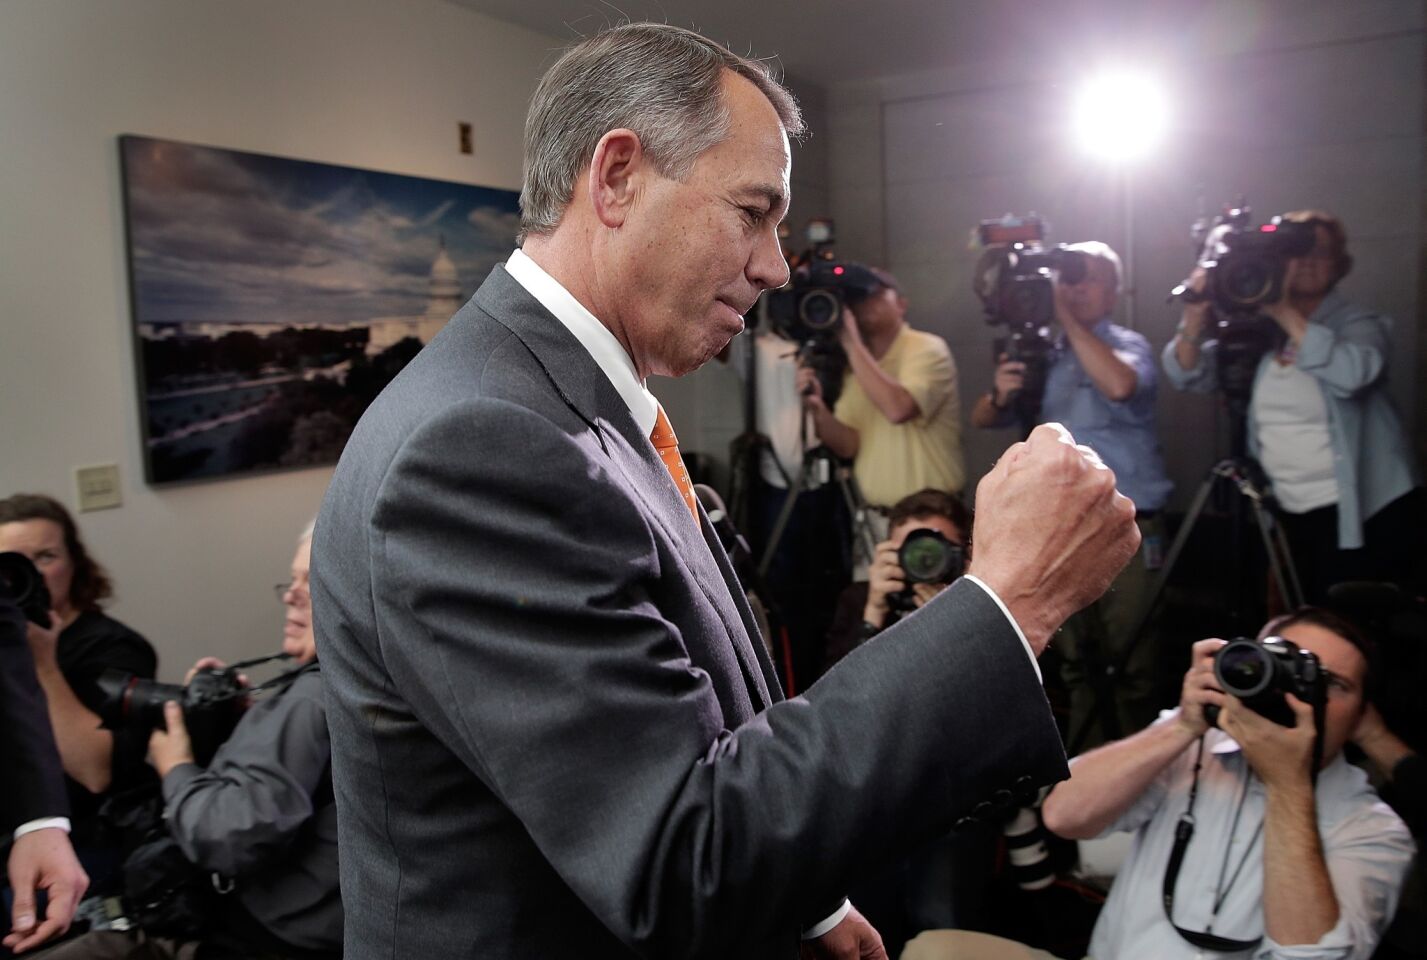 Speaker of the House John A. Boehner (R-Ohio) pumps his fist after leaving a meeting of House Republicans. Congress voted Oct. 16 to end a 16-day government shutdown and allow the Treasury to continue borrowing to pay the nation's bills. President Obama signed the budget deal shortly thereafter.